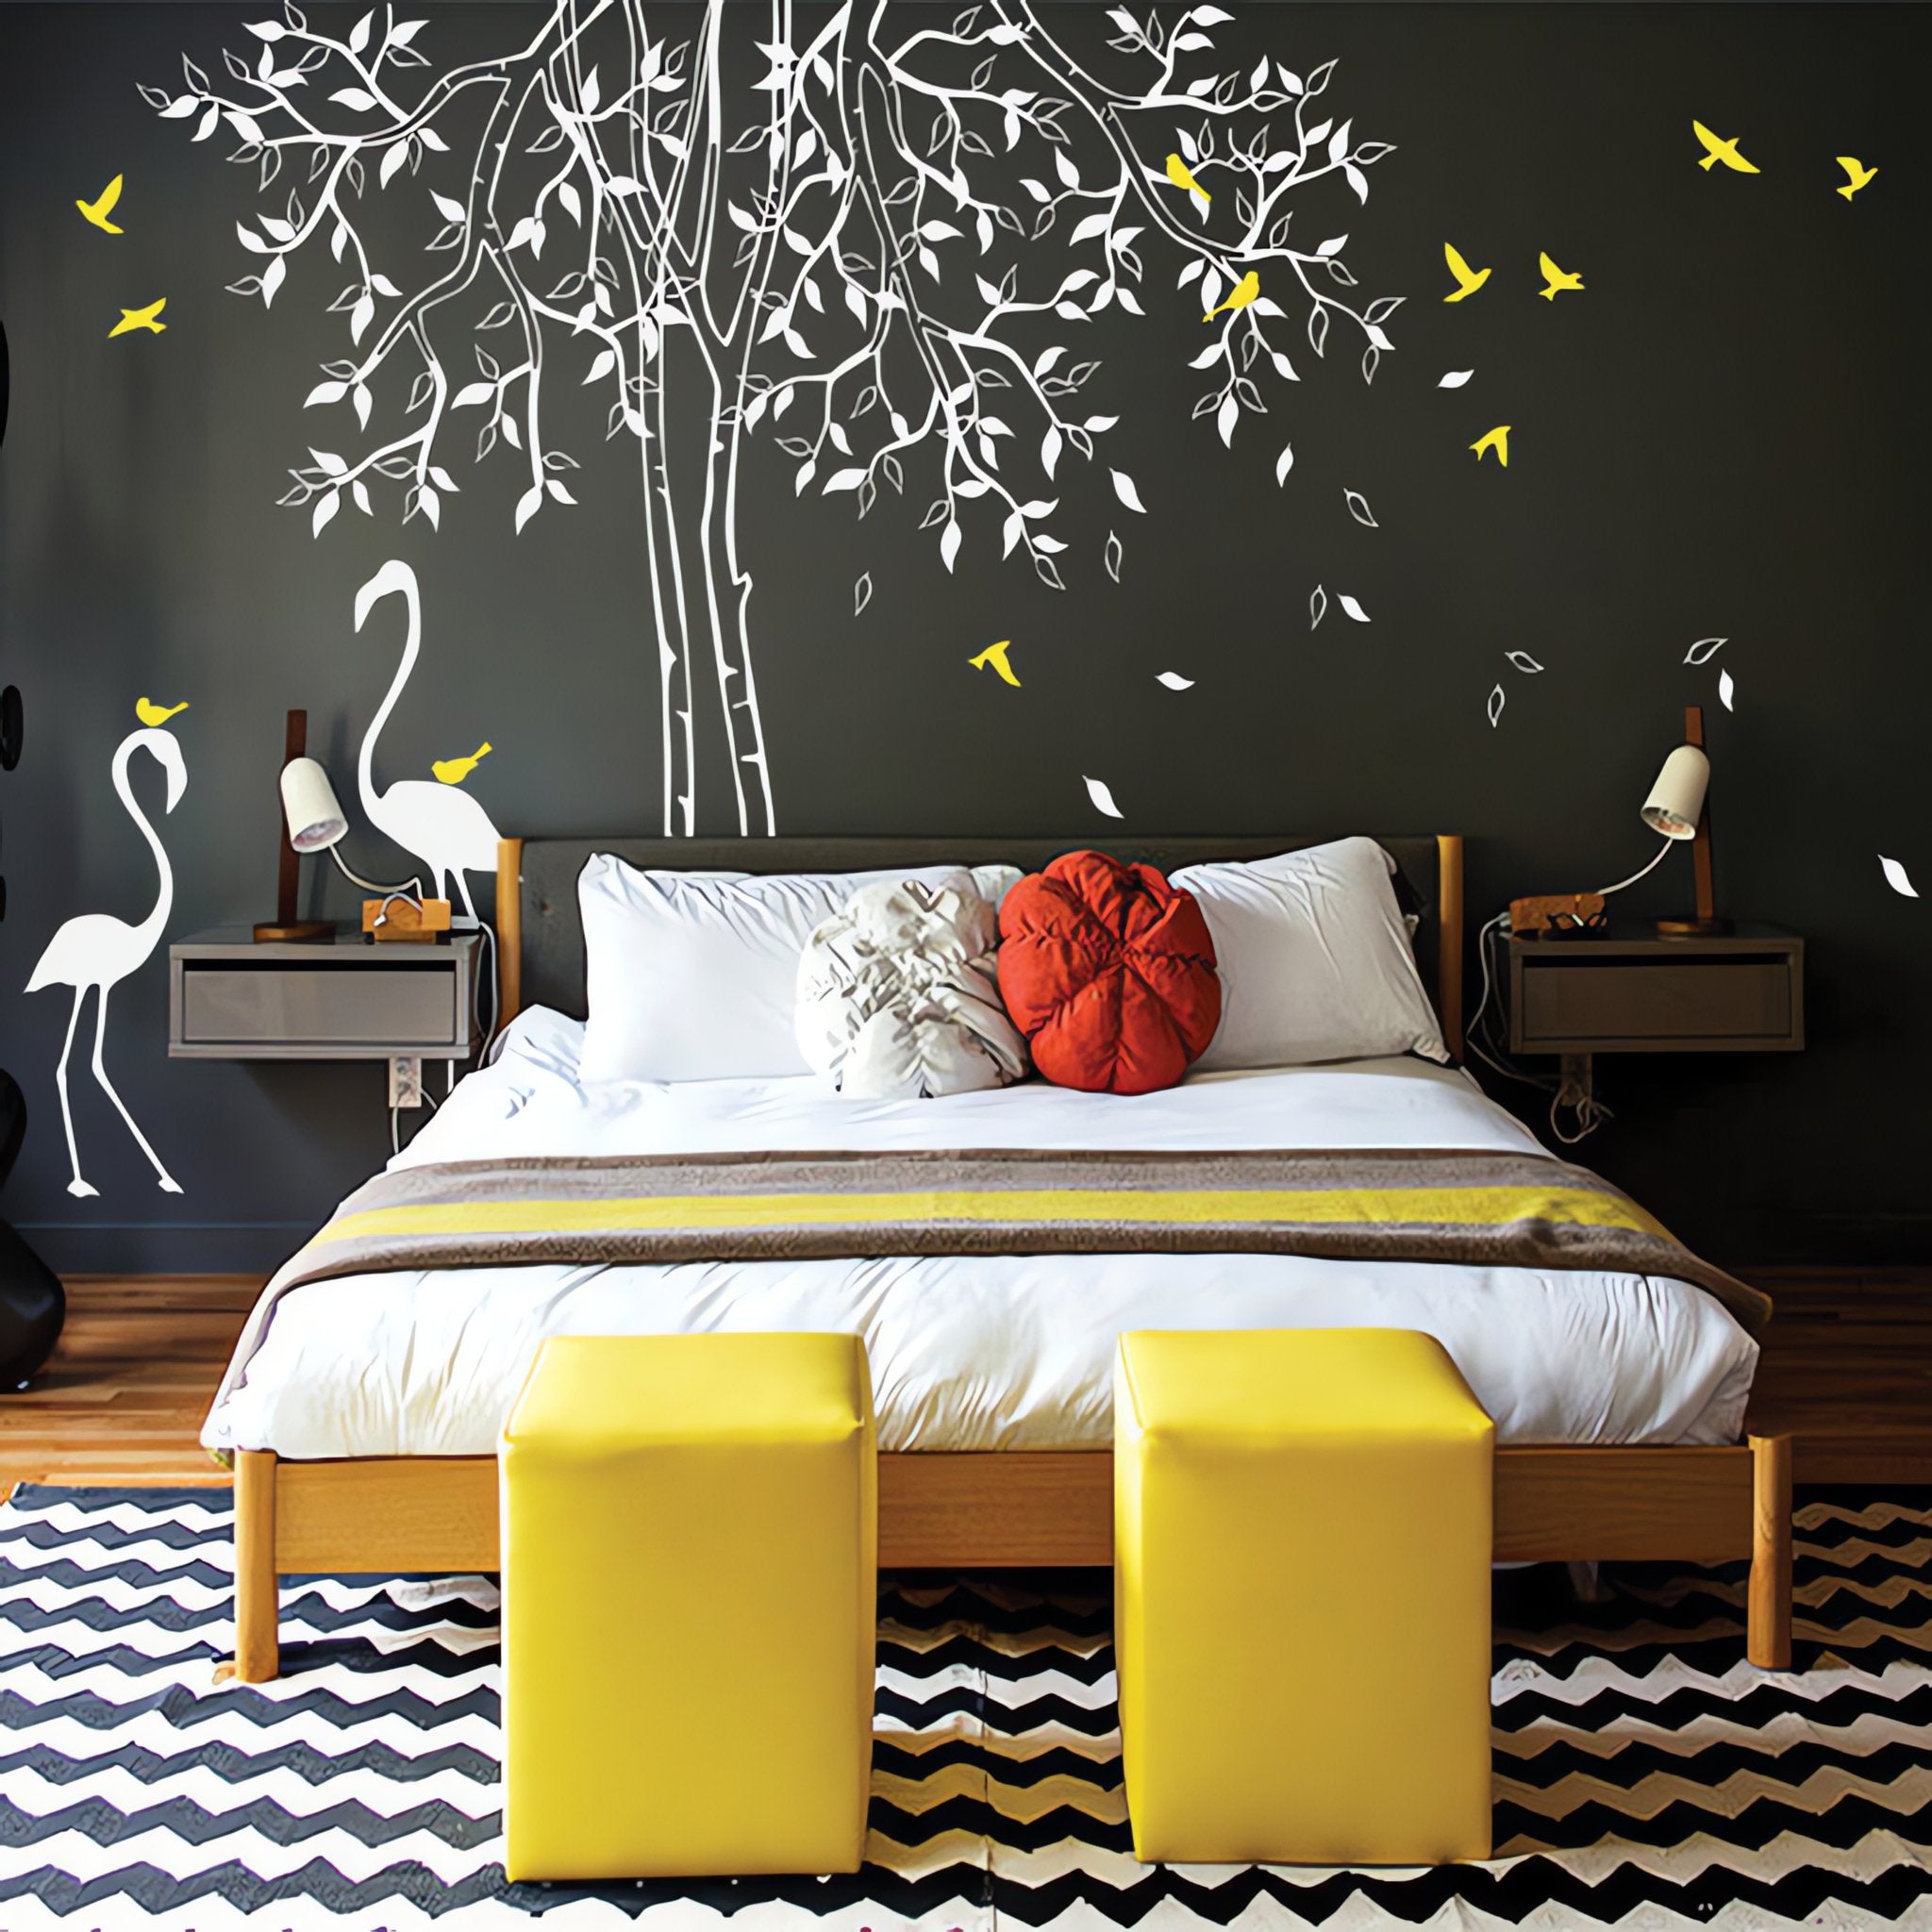 Tree wall sticker with flamingos in a bedroom.